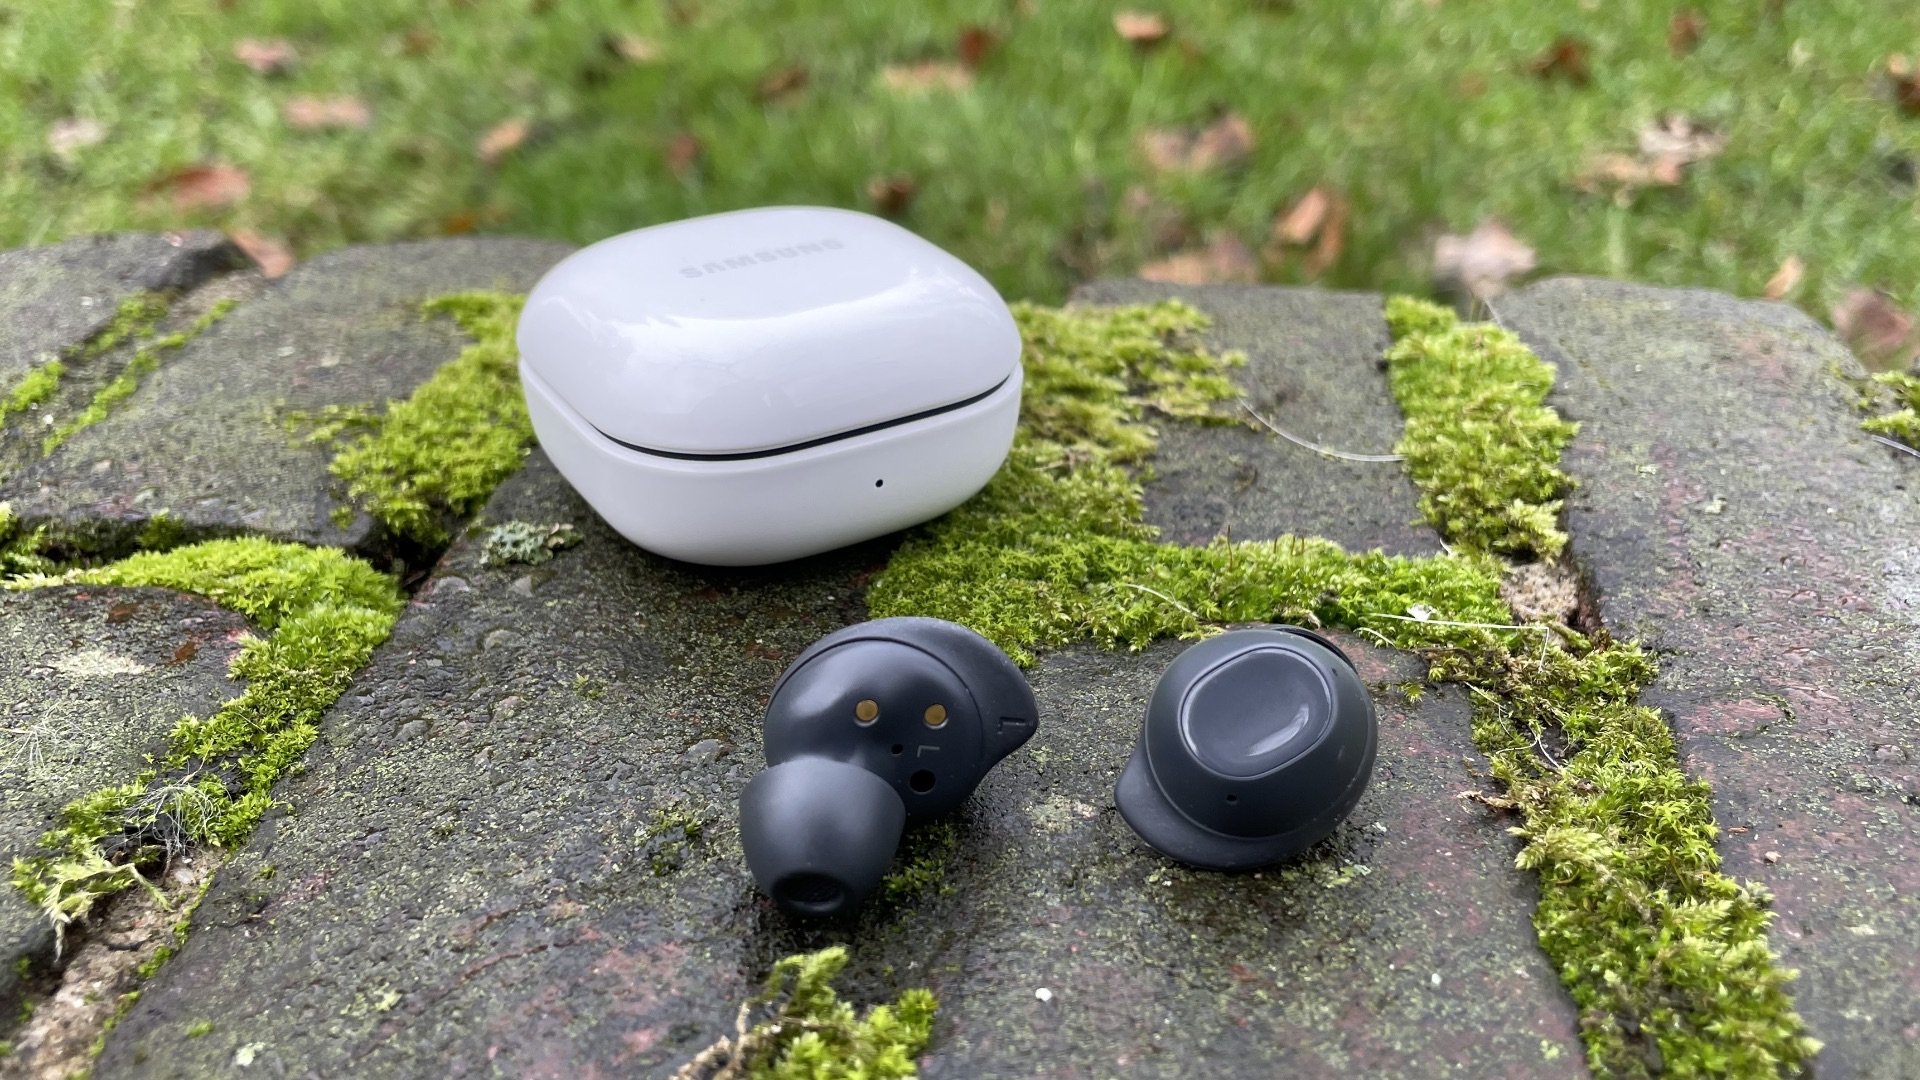 Samsung Galaxy Buds FE go official with ANC and long battery life